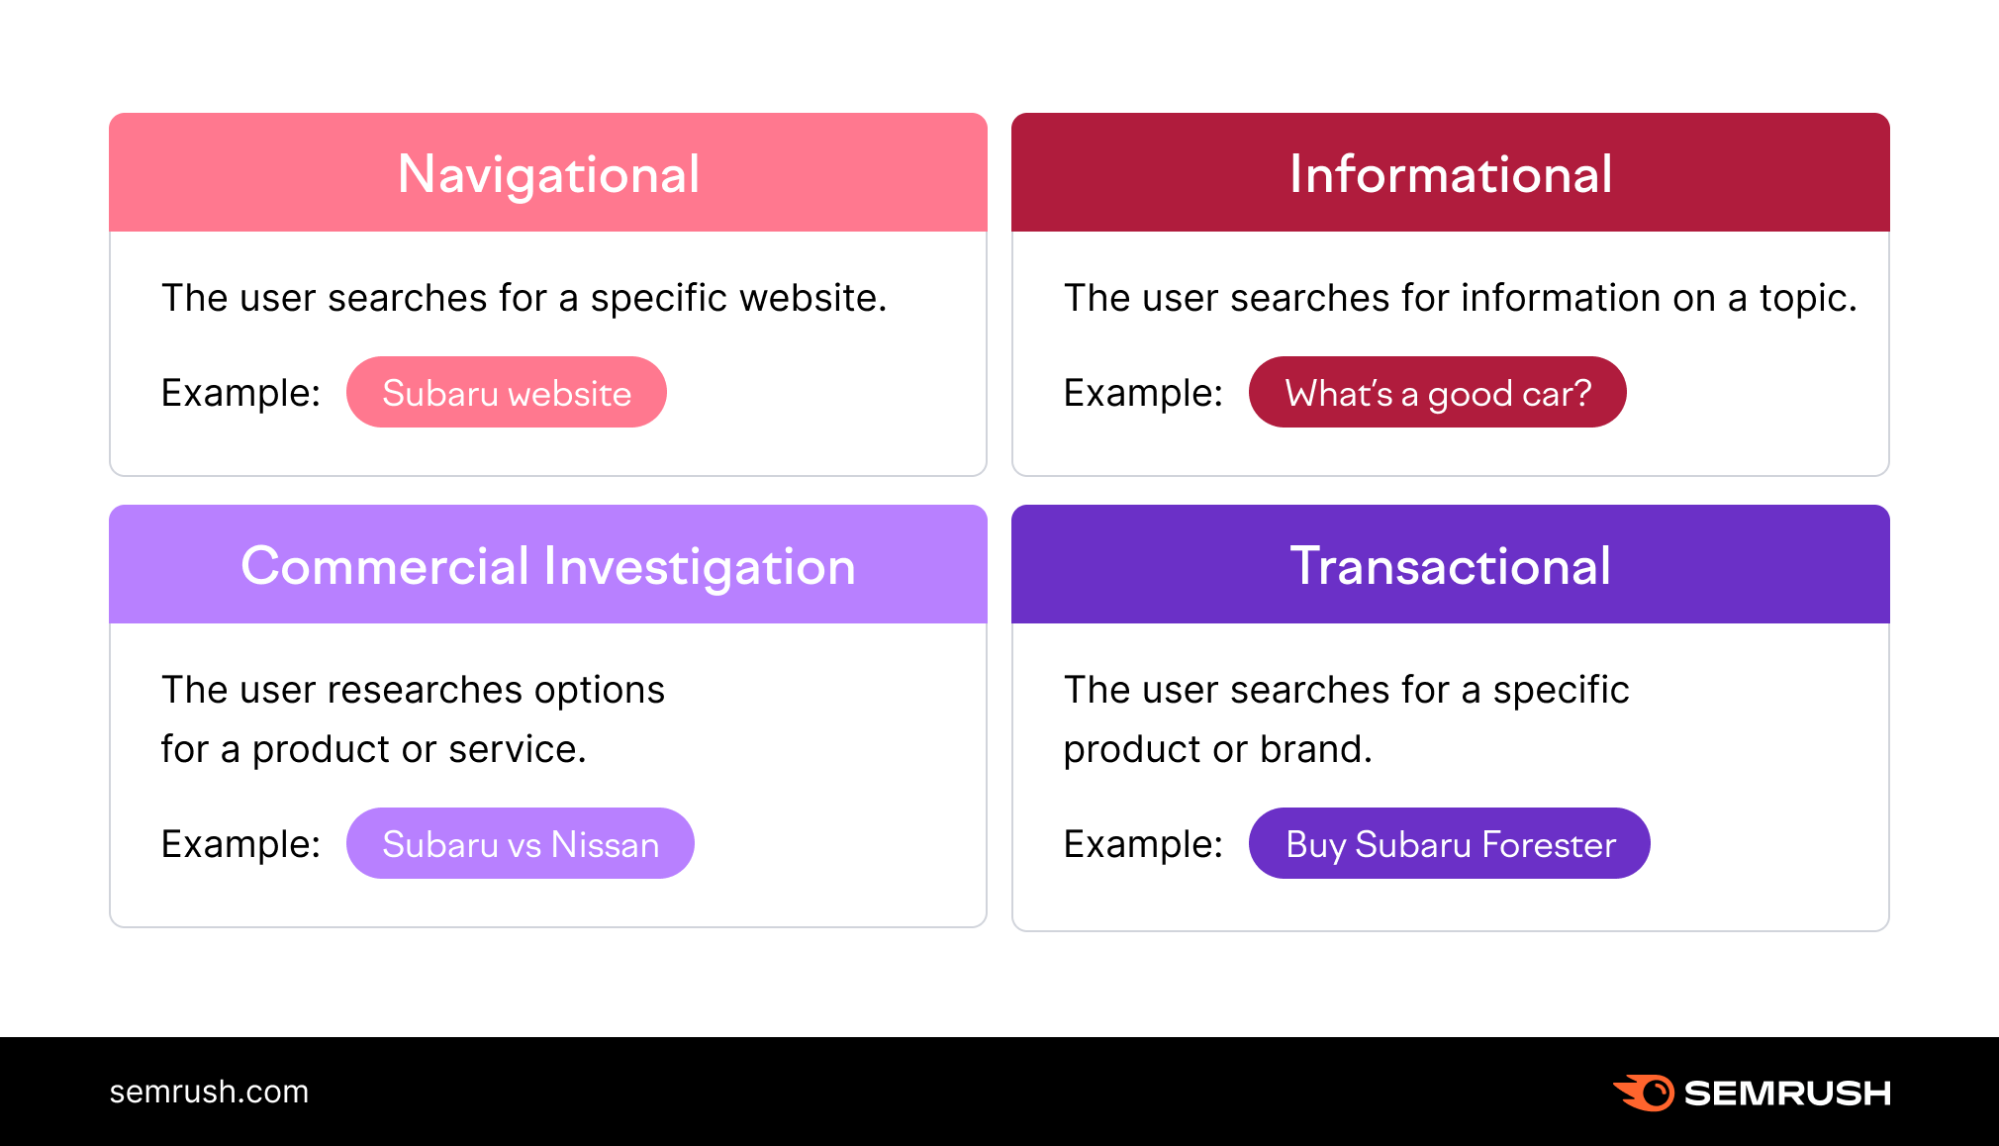 What Is Search Intent? A Complete Guide